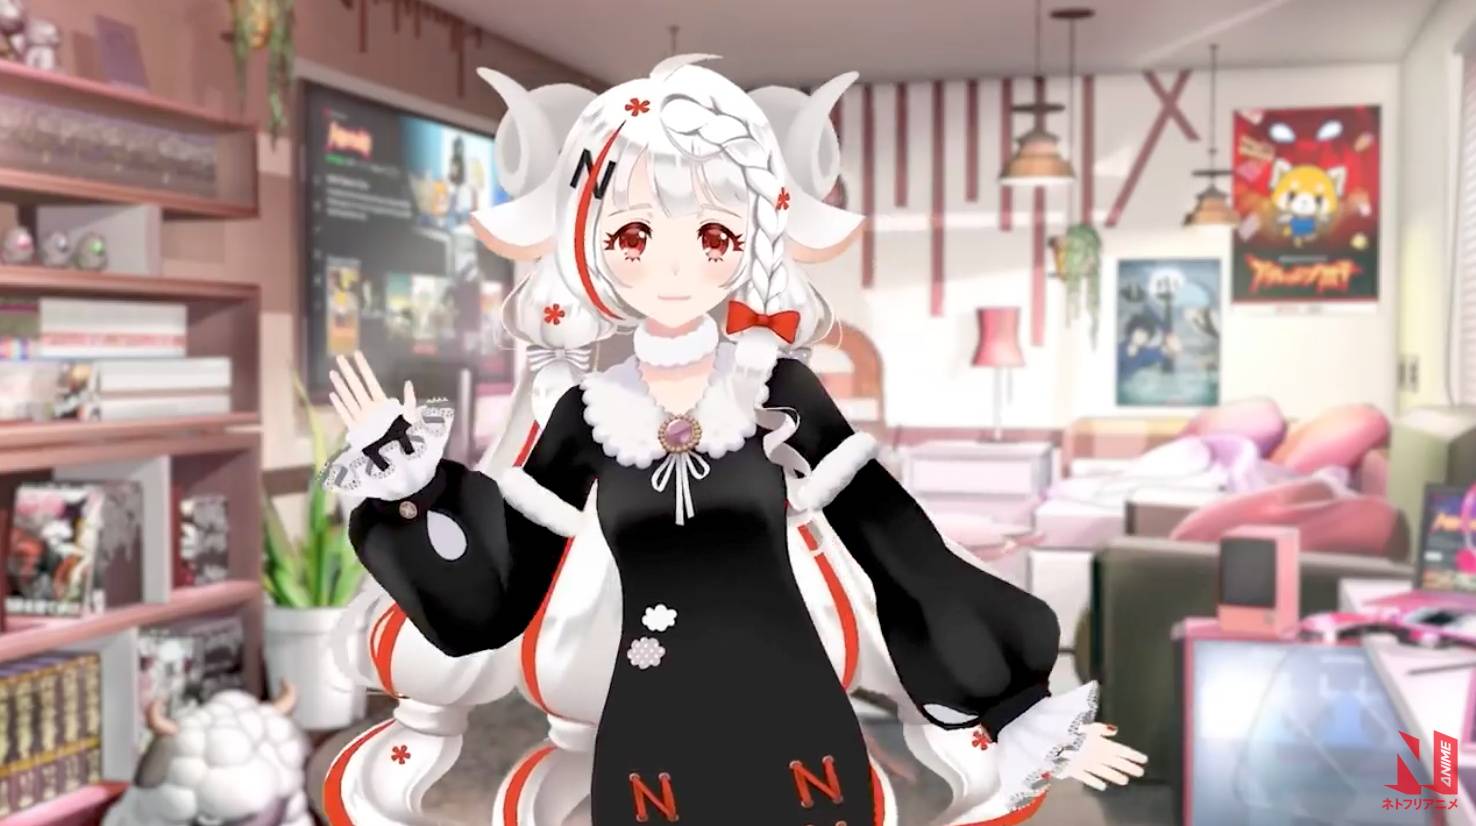 What Is a VTuber? 7 Top VTubers to Watch Closely in 2021